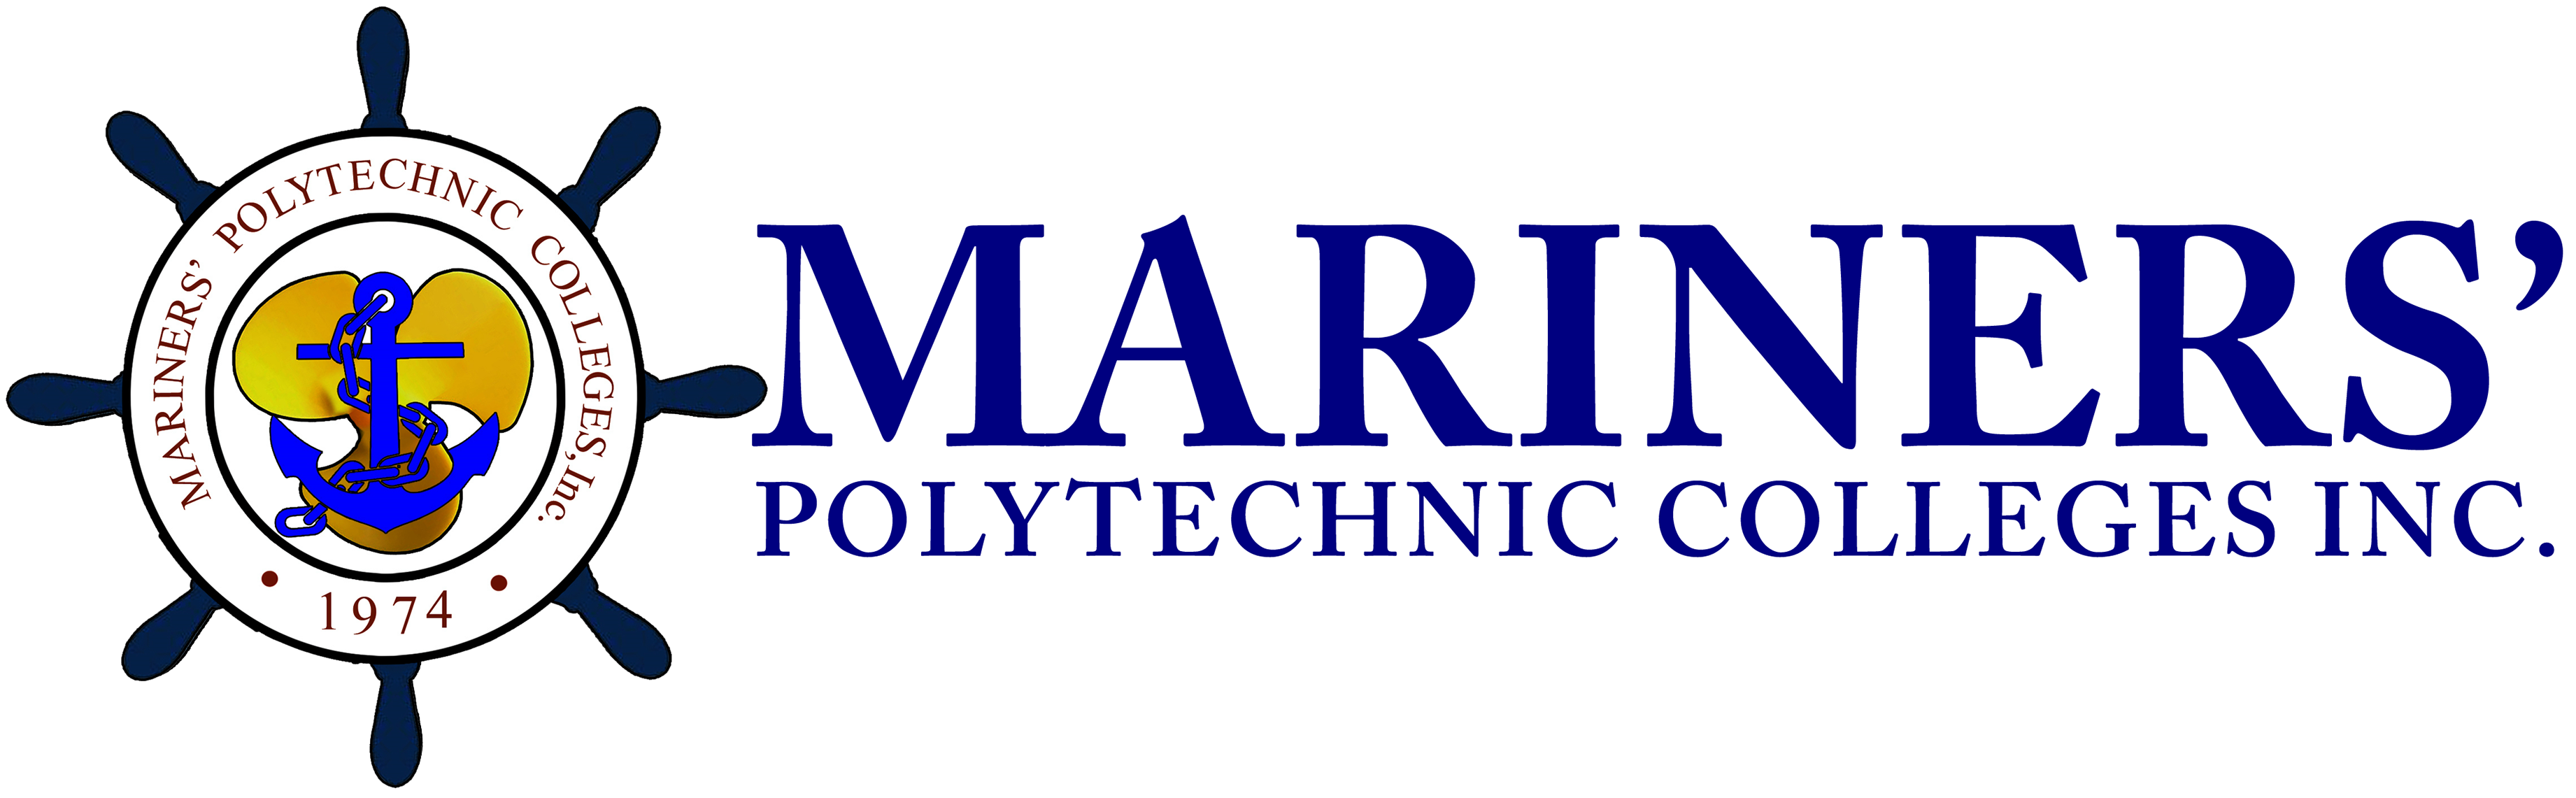 Mariners' Polytechnic Colleges, Inc. Logo